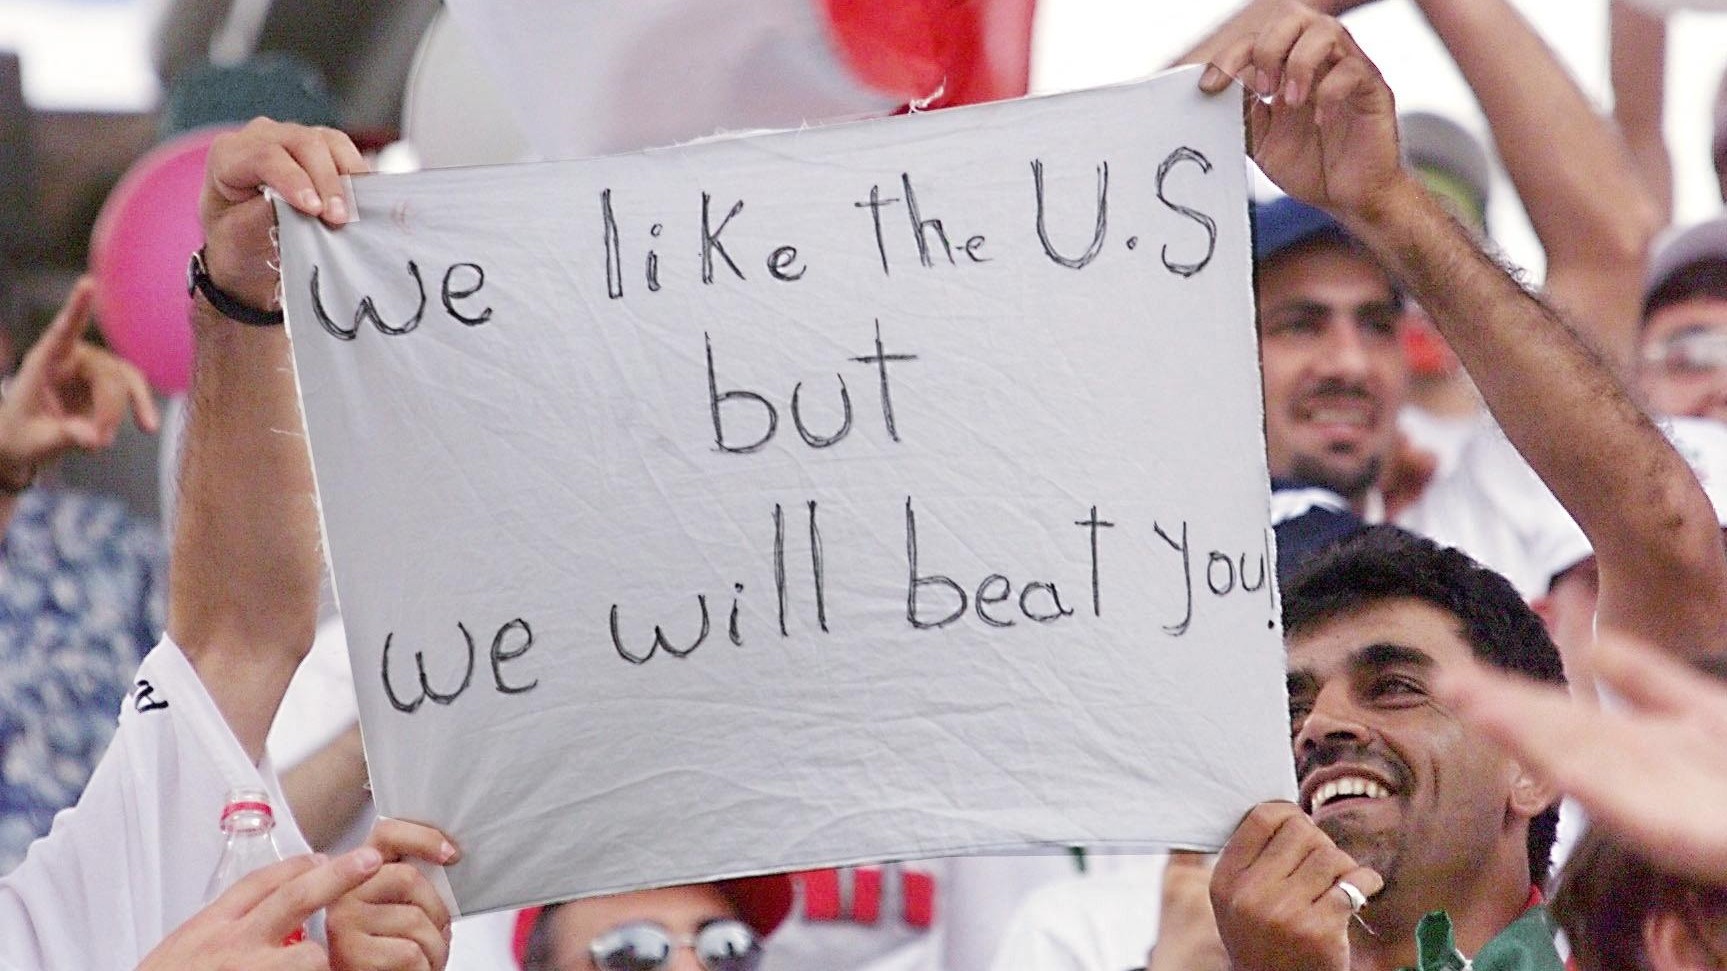 Iranian supporters display a placard reading: 'We like the USA but we will beat you' at the 1998 World Cup Group match between Iran and the United States on 21 June, 1998 (AFP)